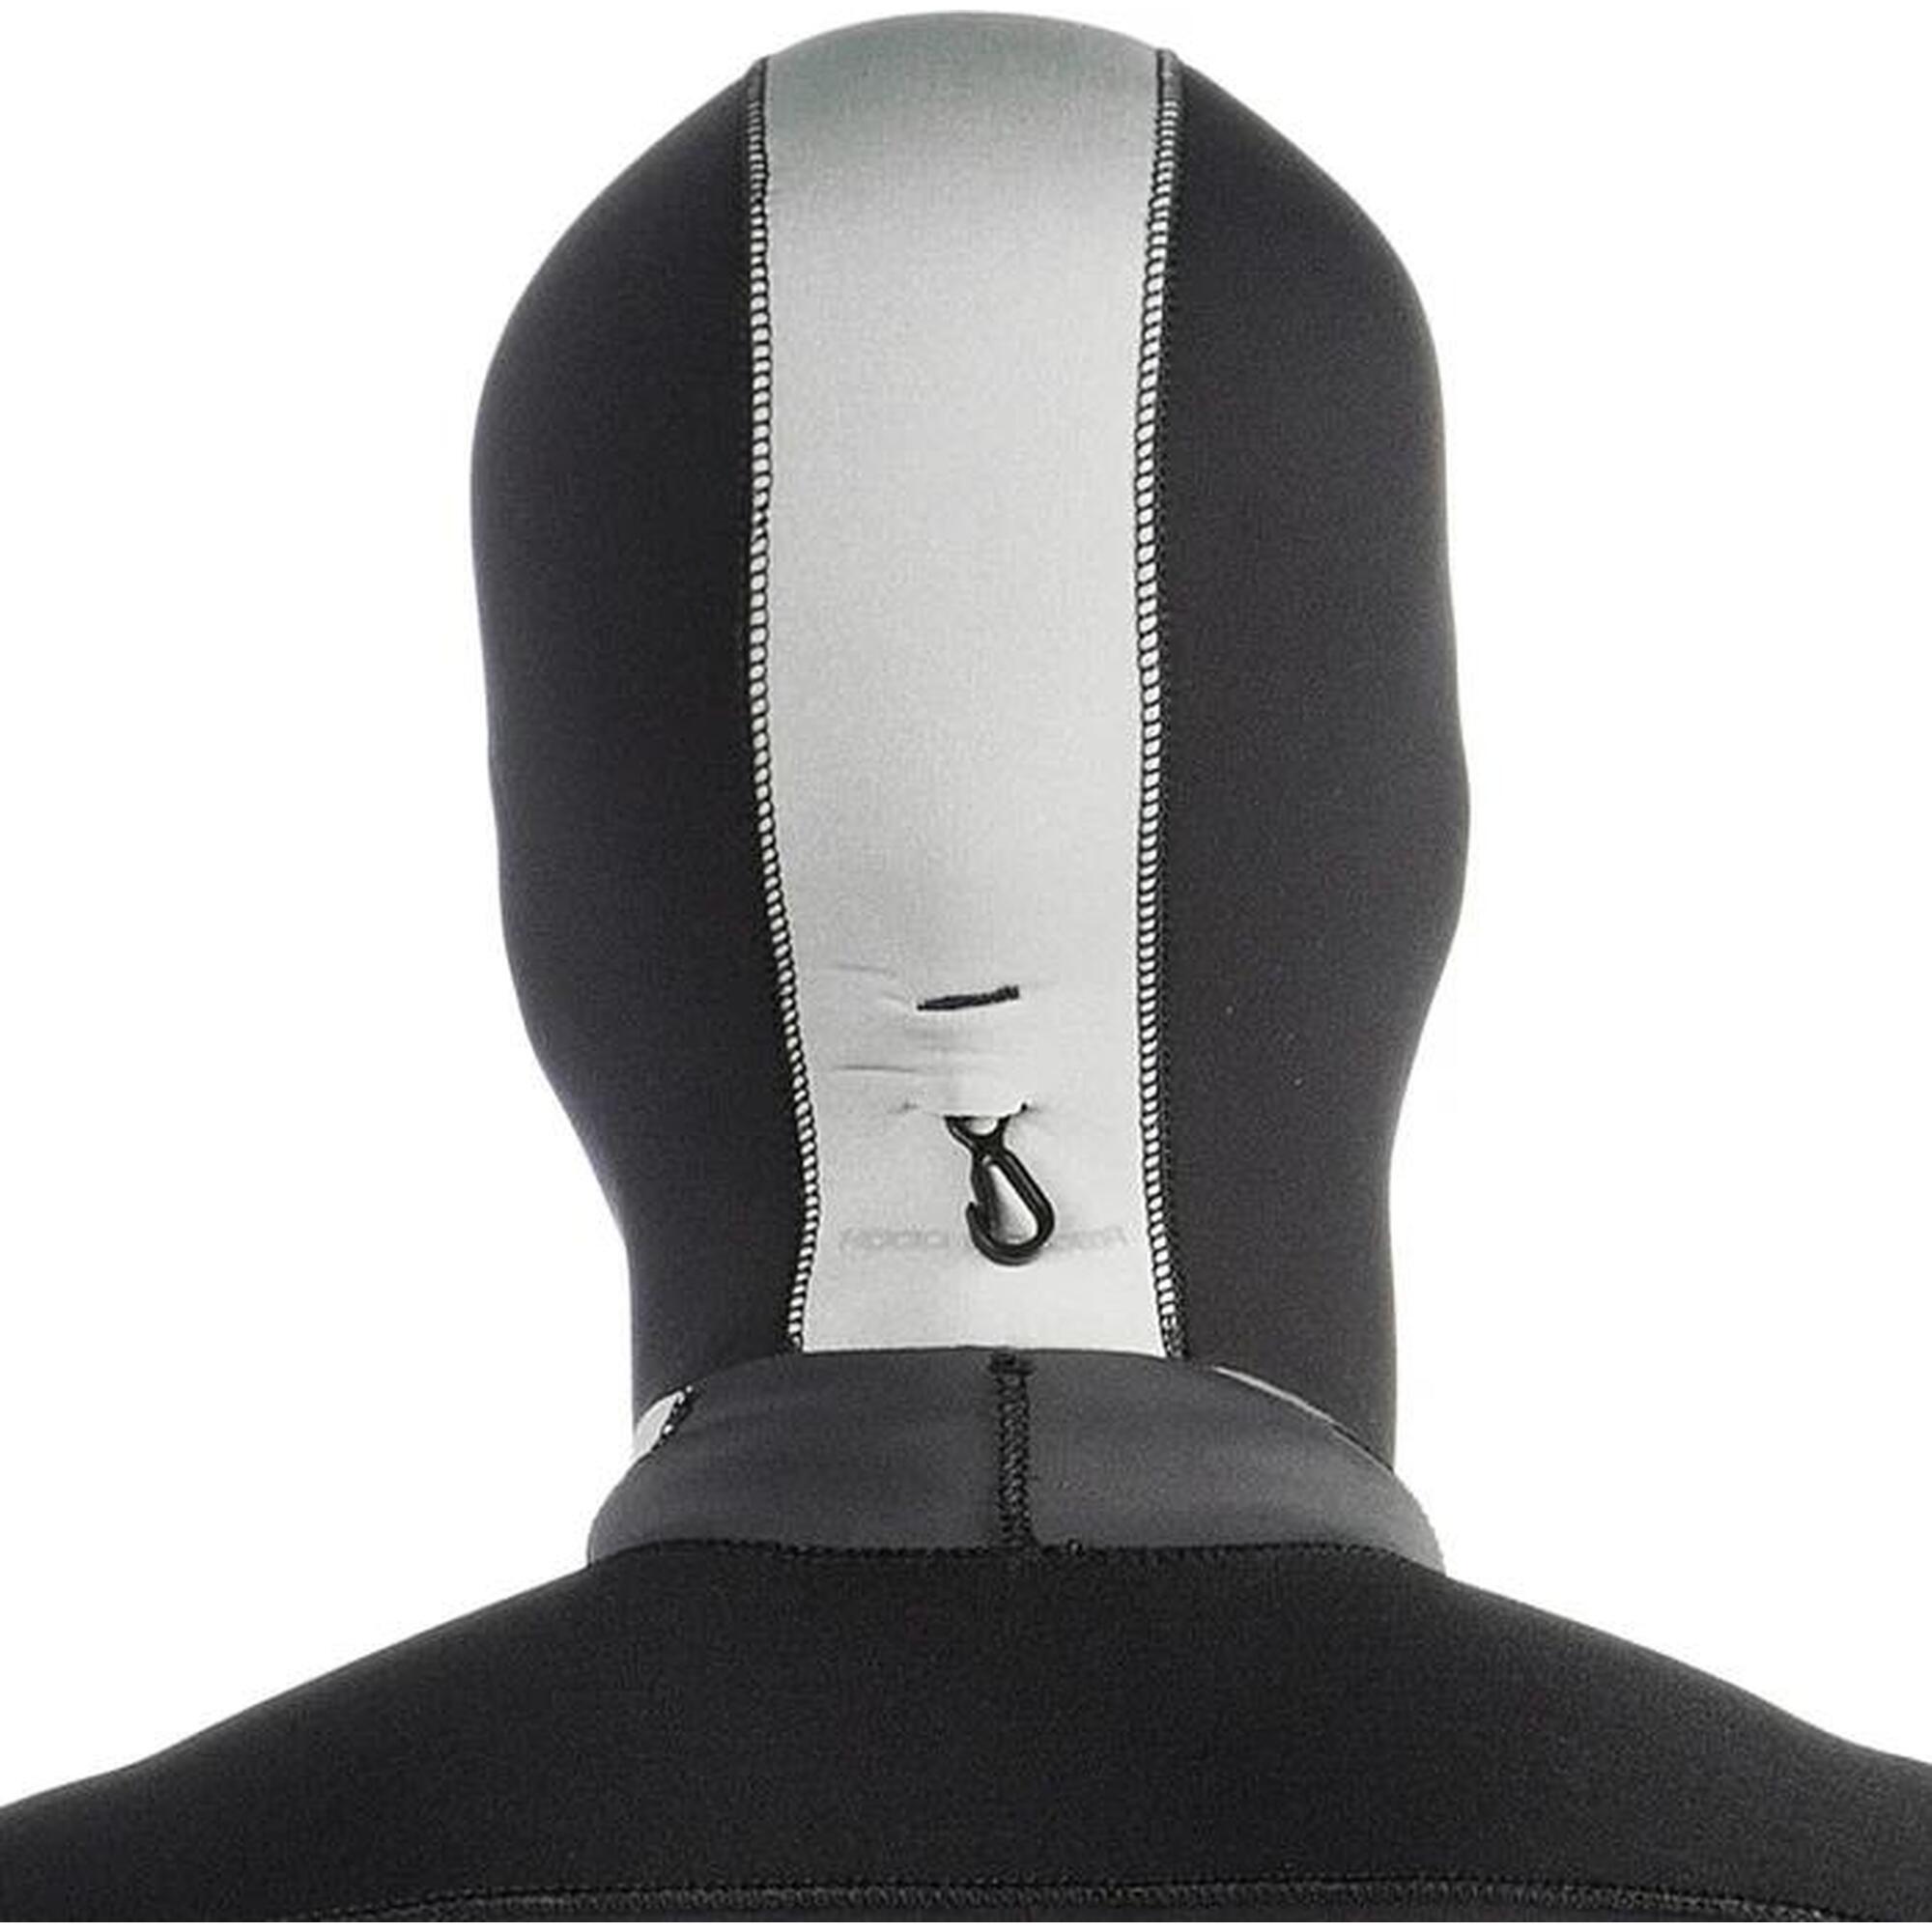 Hood Plus Men's Wetsuit Hood With Safety Snap Hook